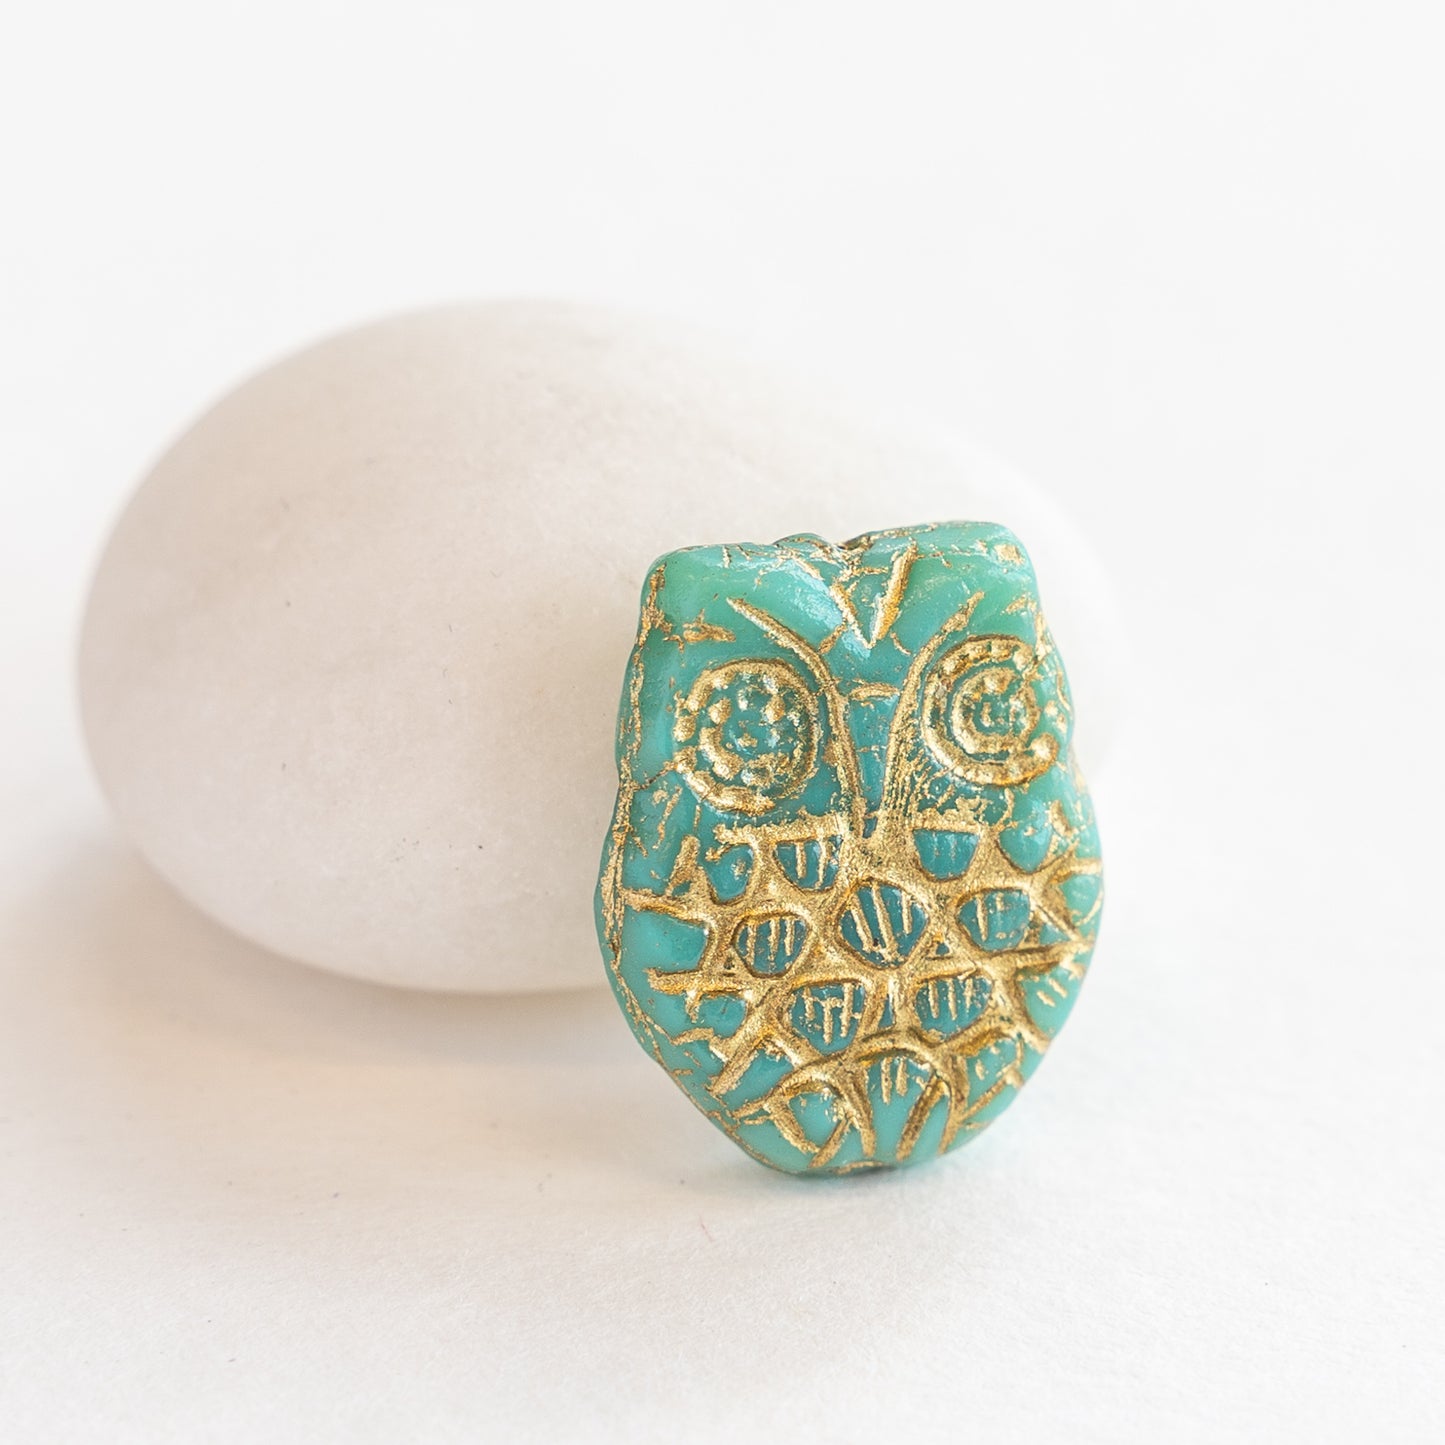 Glass Owl Beads - Turquoise with Gold Wash - 4 Beads